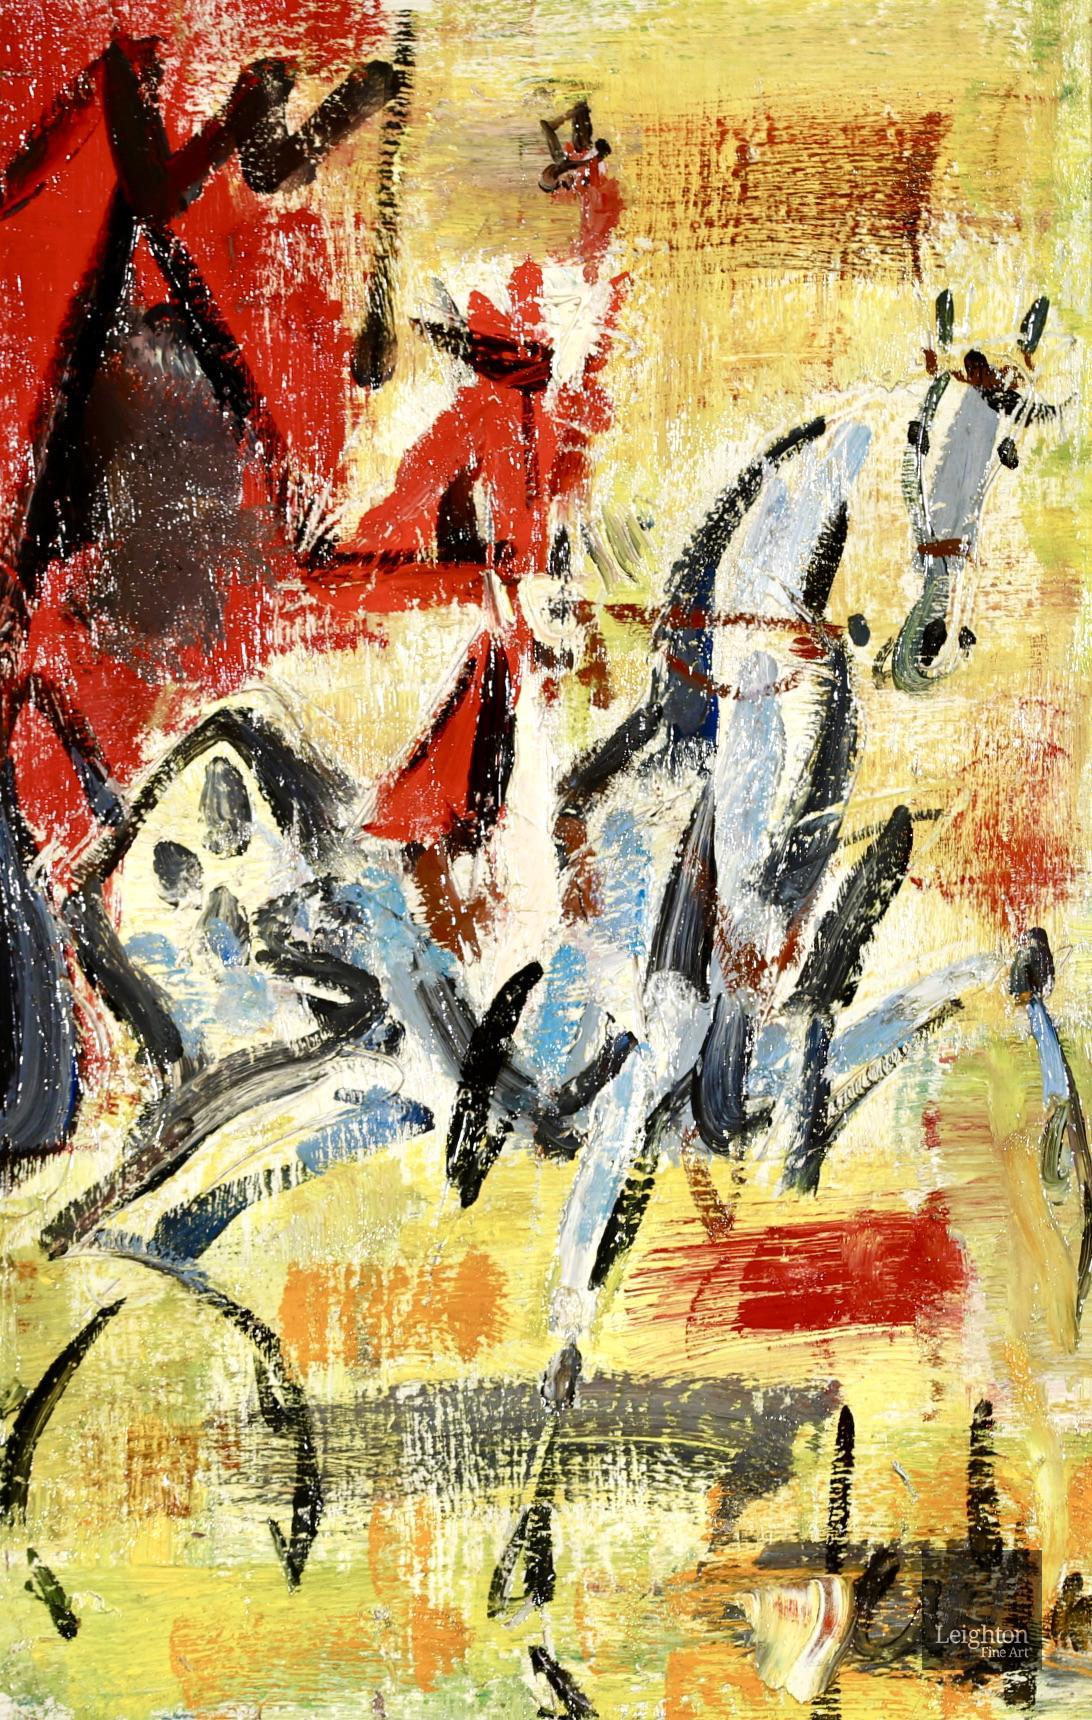 GEN PAUL Abstract Painting - Horse & Rider - Expressionist Portrait Oil Painting by Gen Paul